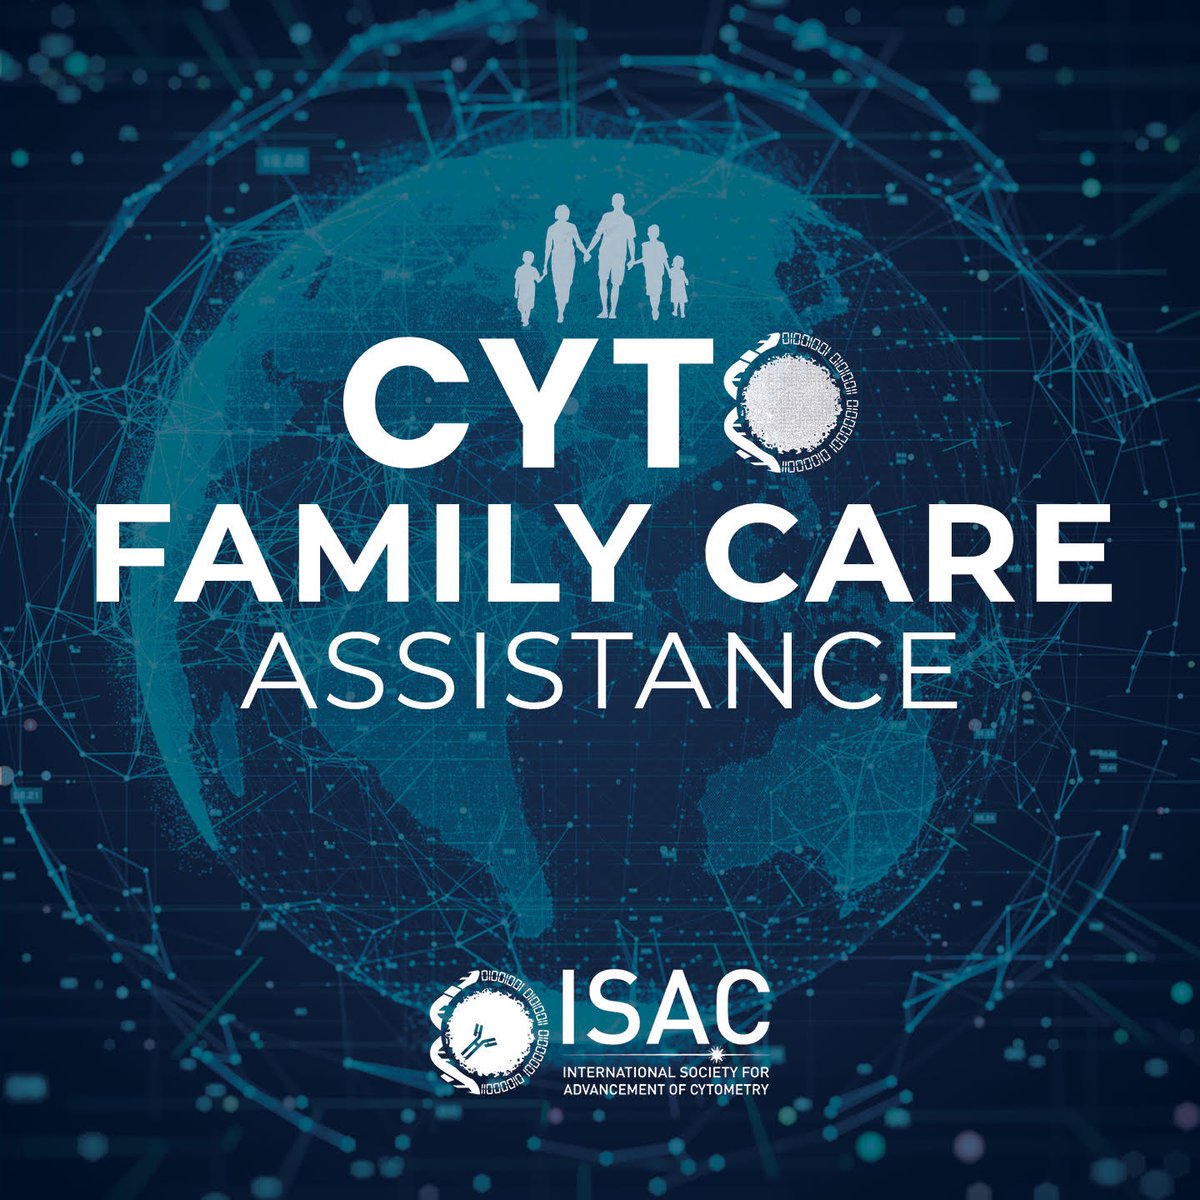 ISAC is proud to announce the new CYTO Family Care Assistance fund. The goal of this new program is to help reduce attendance-related barriers and increase CYTO participation within our diverse community. Learn more and contribute: isac-net.org/donations/fund… #isac_cyto